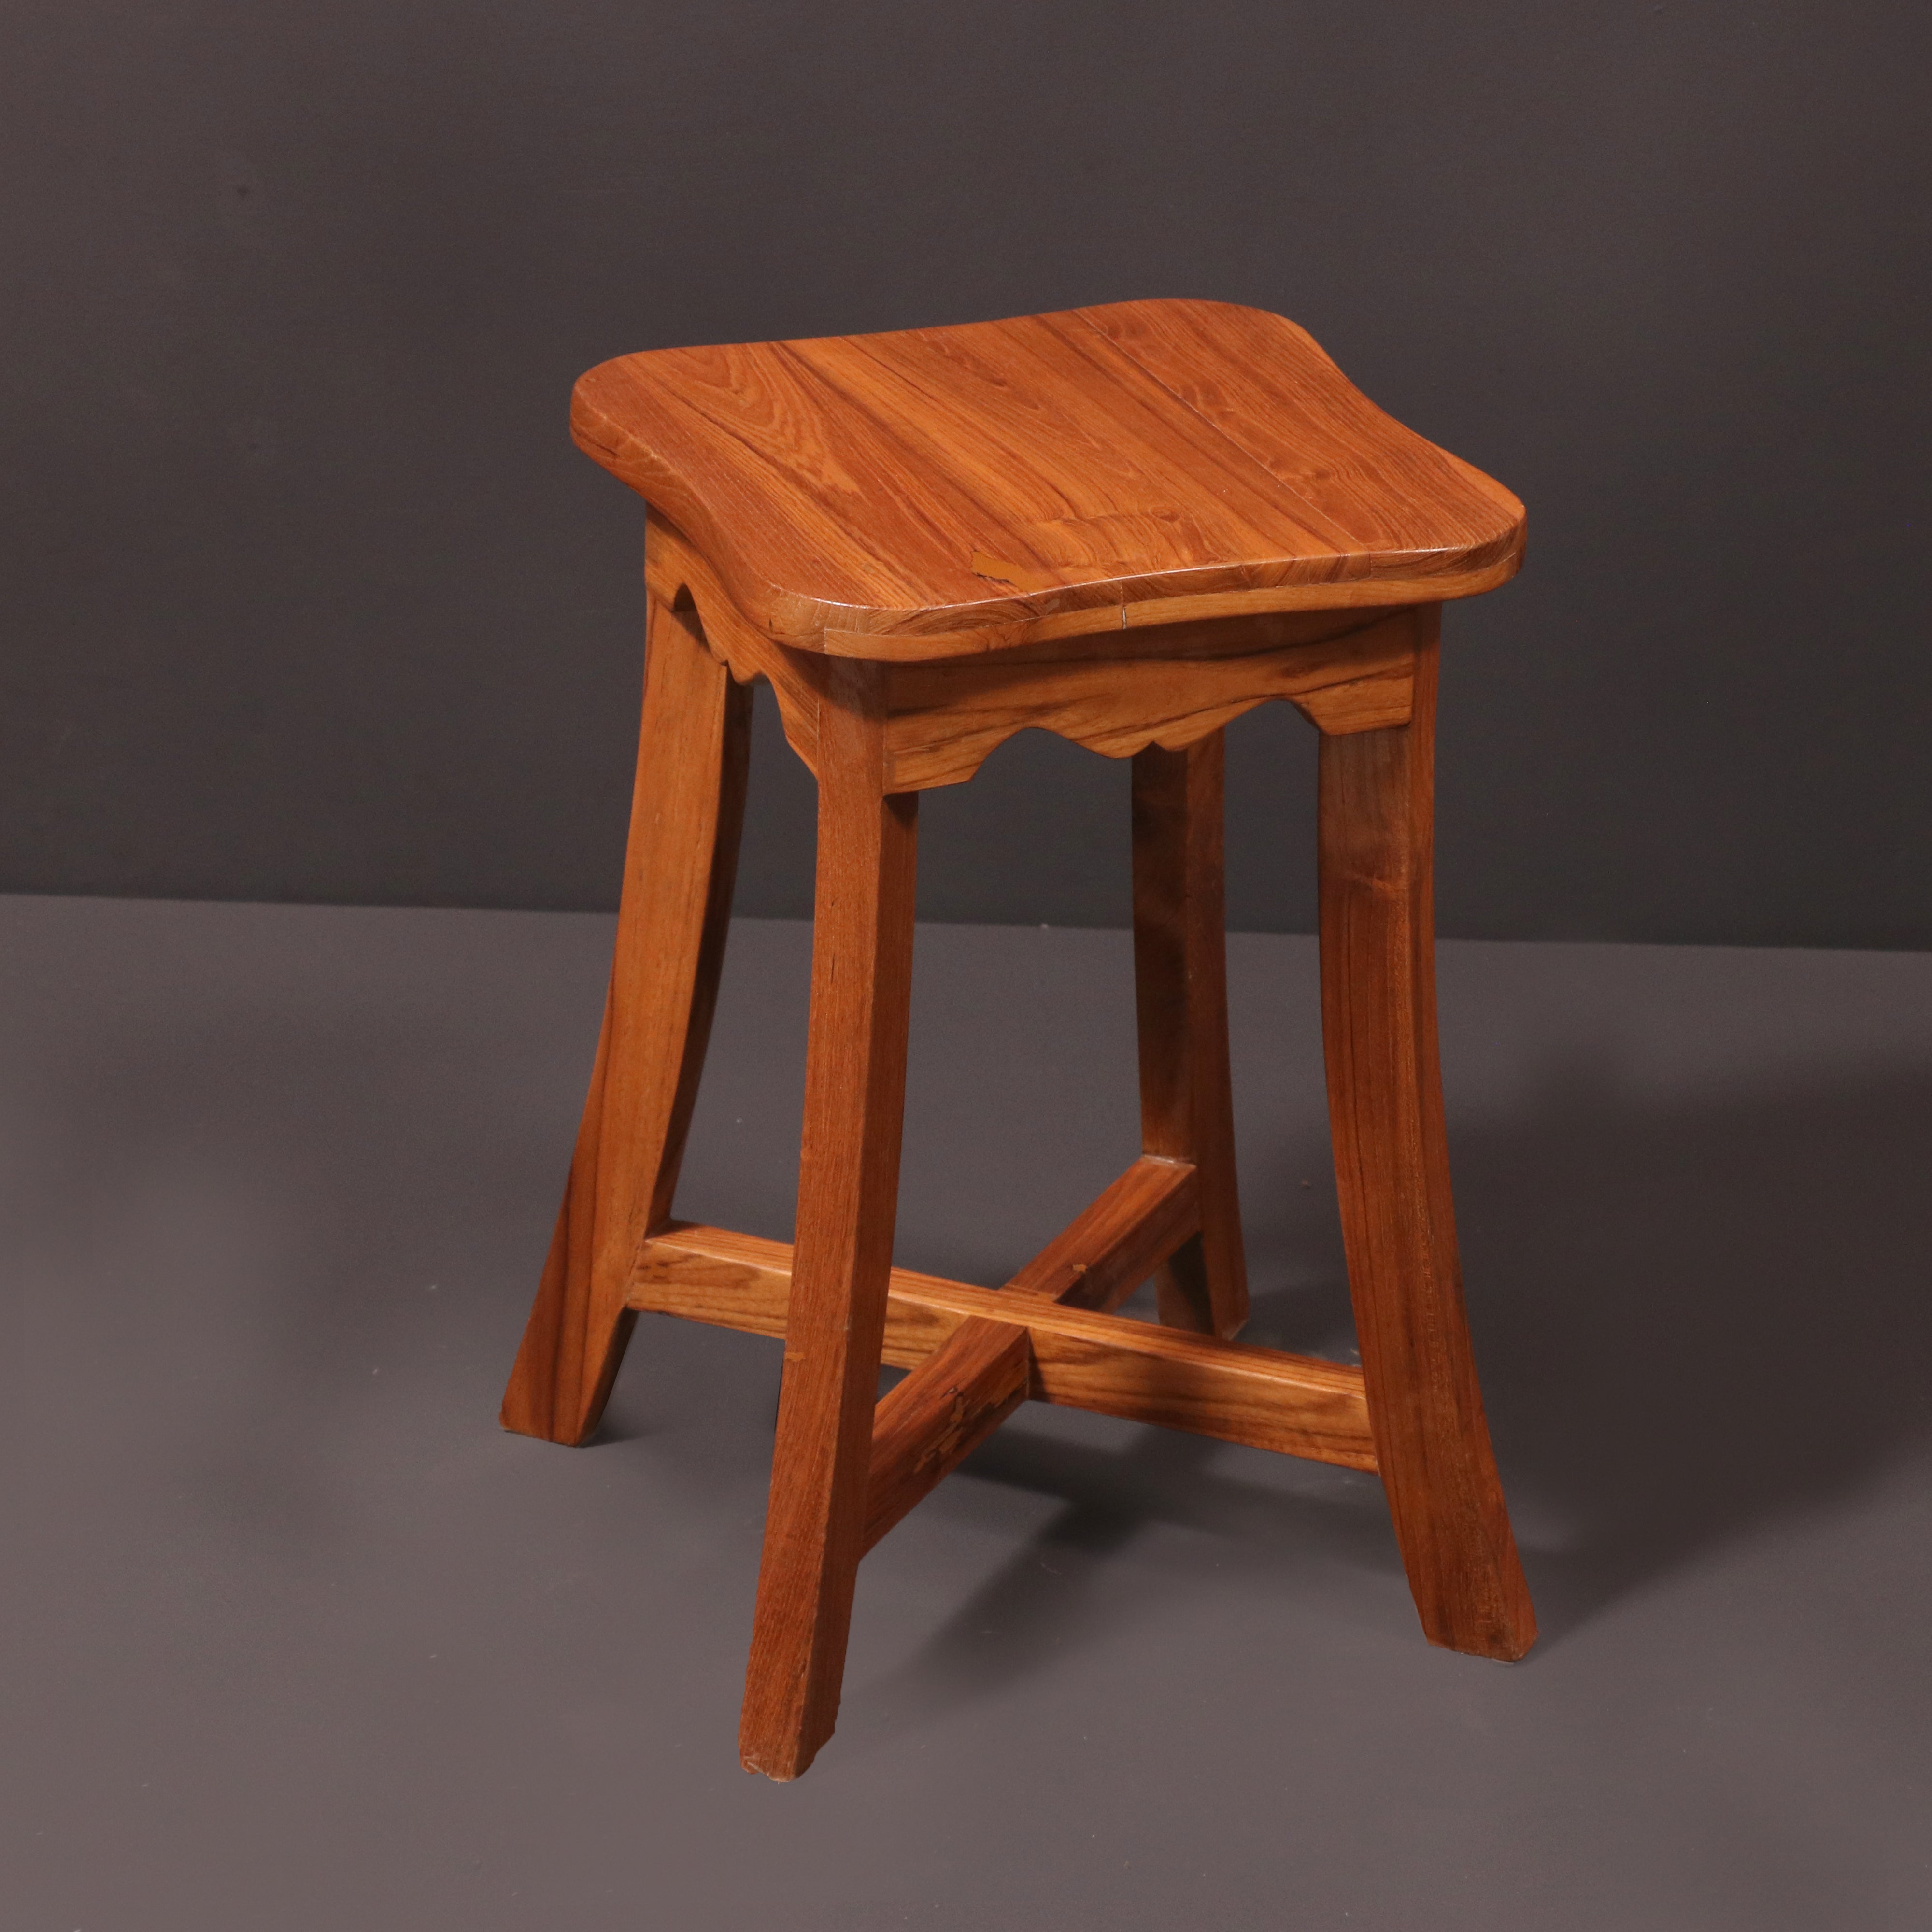 Carved and Curved Teak Stool Stool